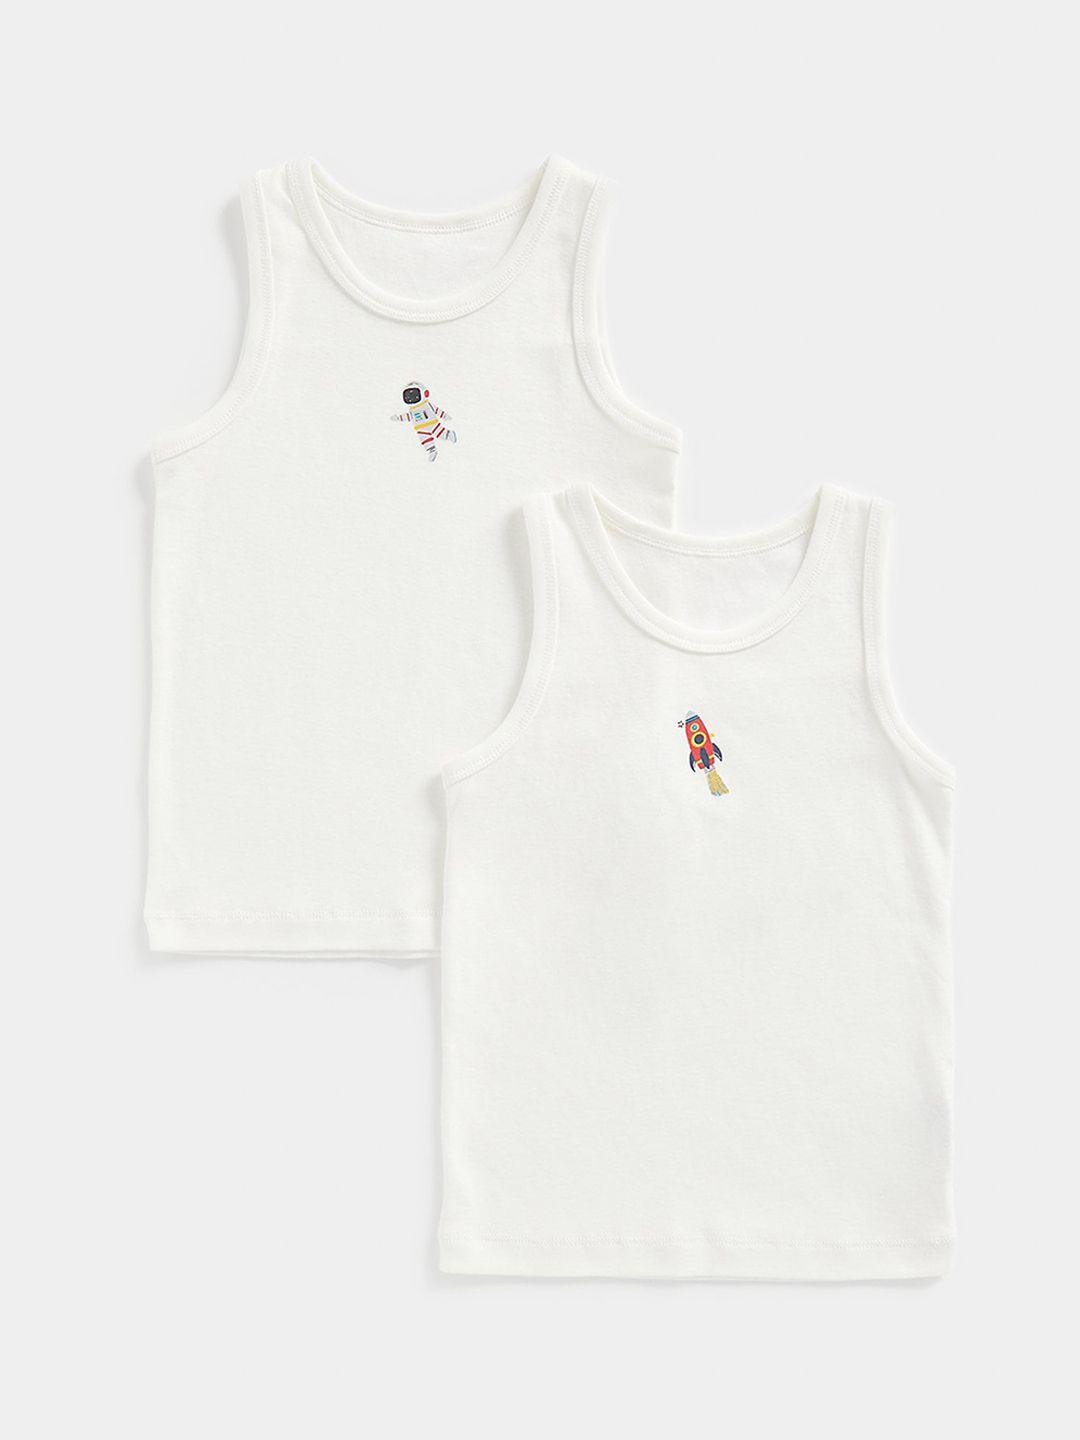 mothercare-boys-pack-of-2-graphic-printed-pure-cotton-basic-vests